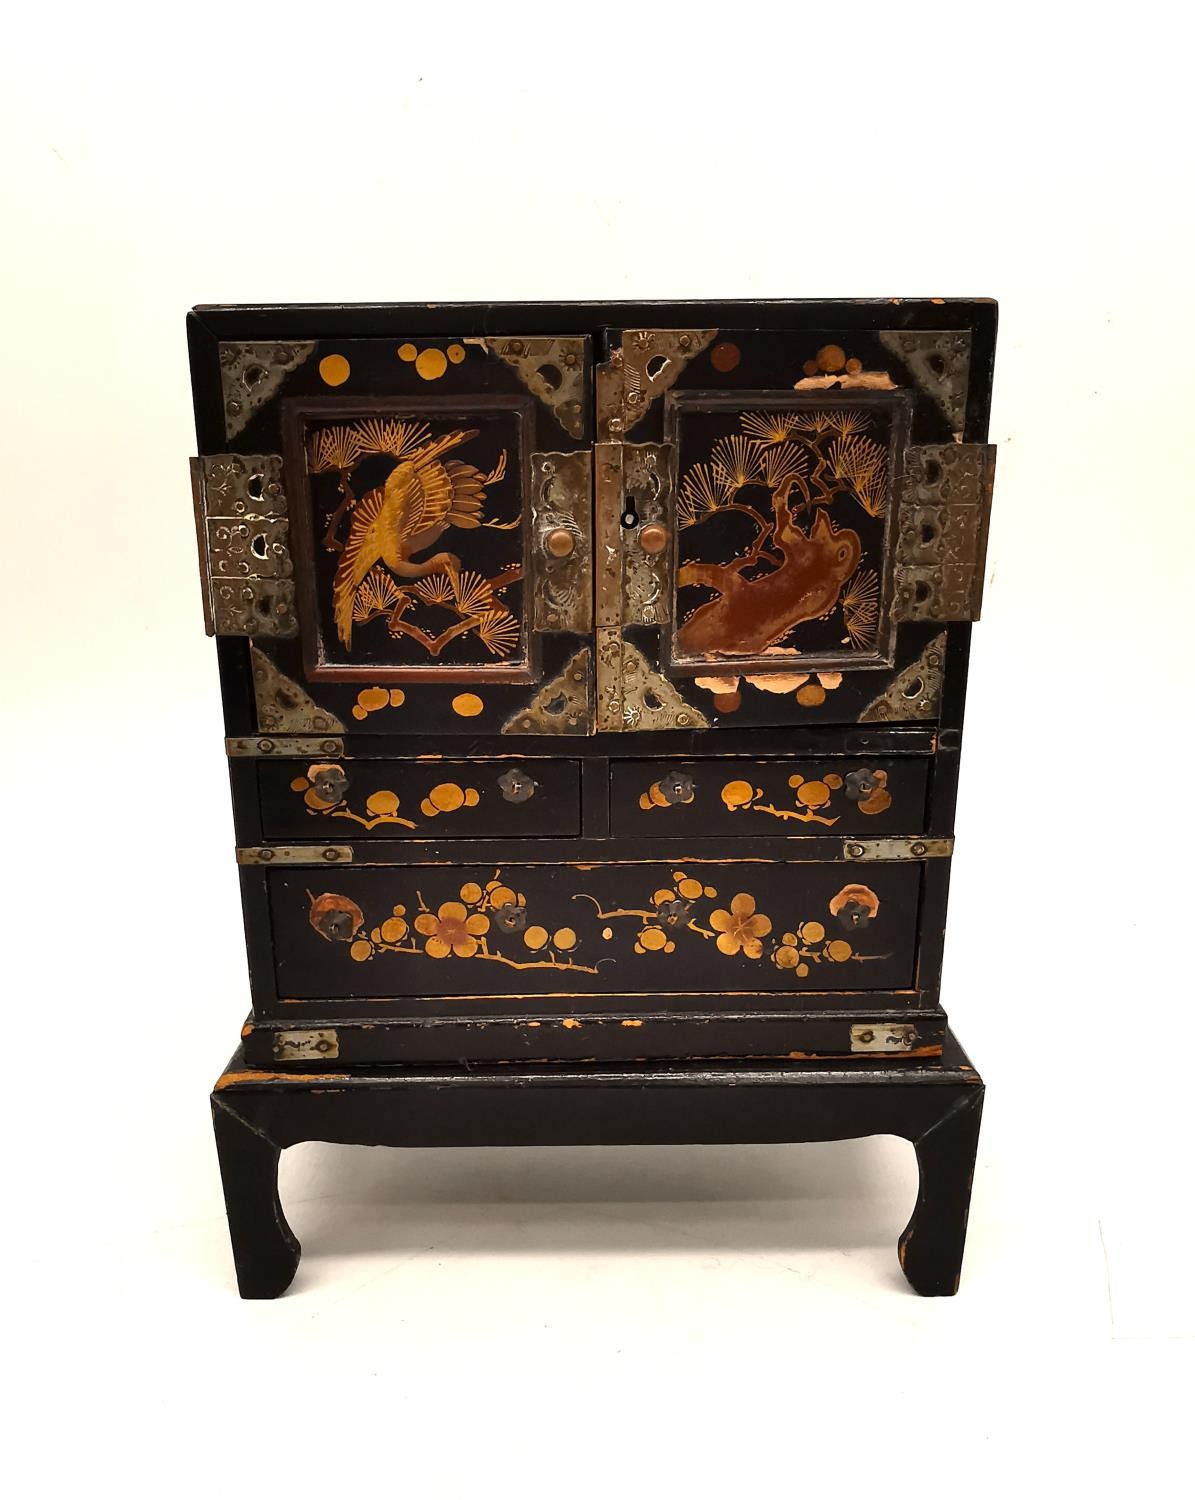 A late 19th century Japanese lacquered and gilded jewellery cabinet on stand. Each door decorated